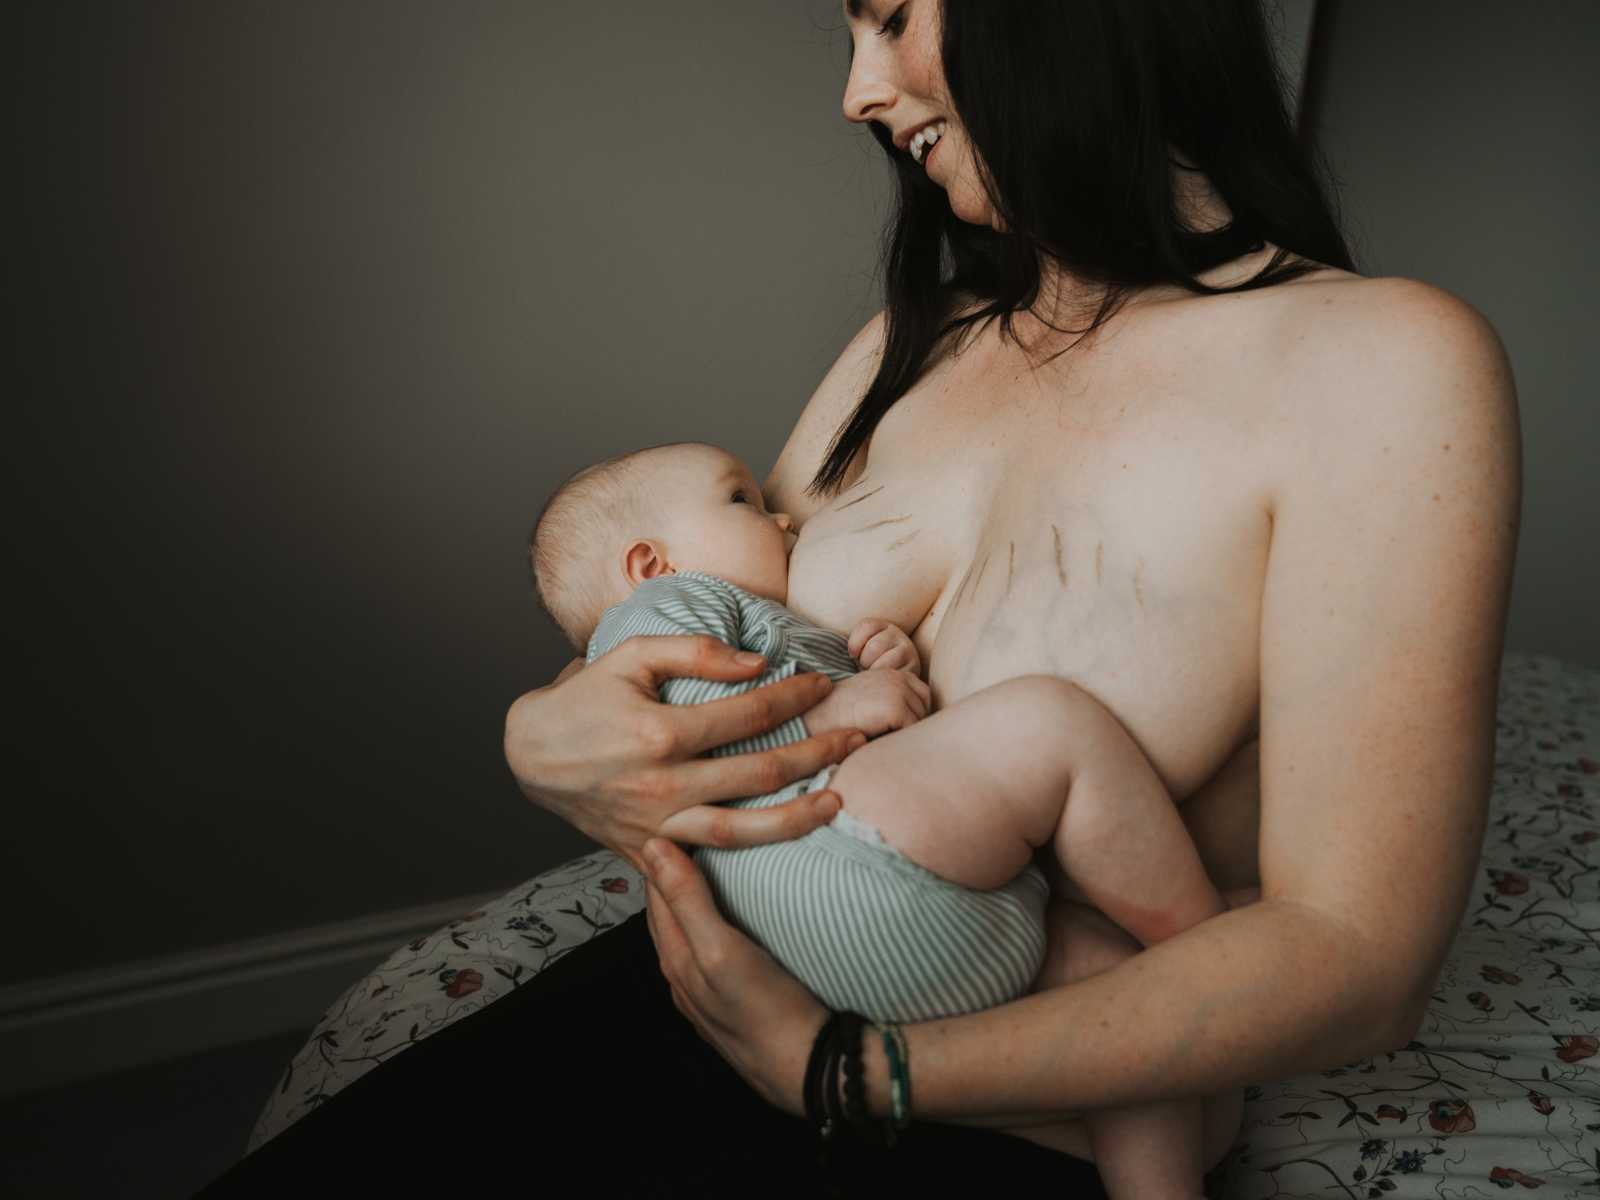 Woman smiling down at baby while breastfeeding with stretch marks in breast covered in gold dust